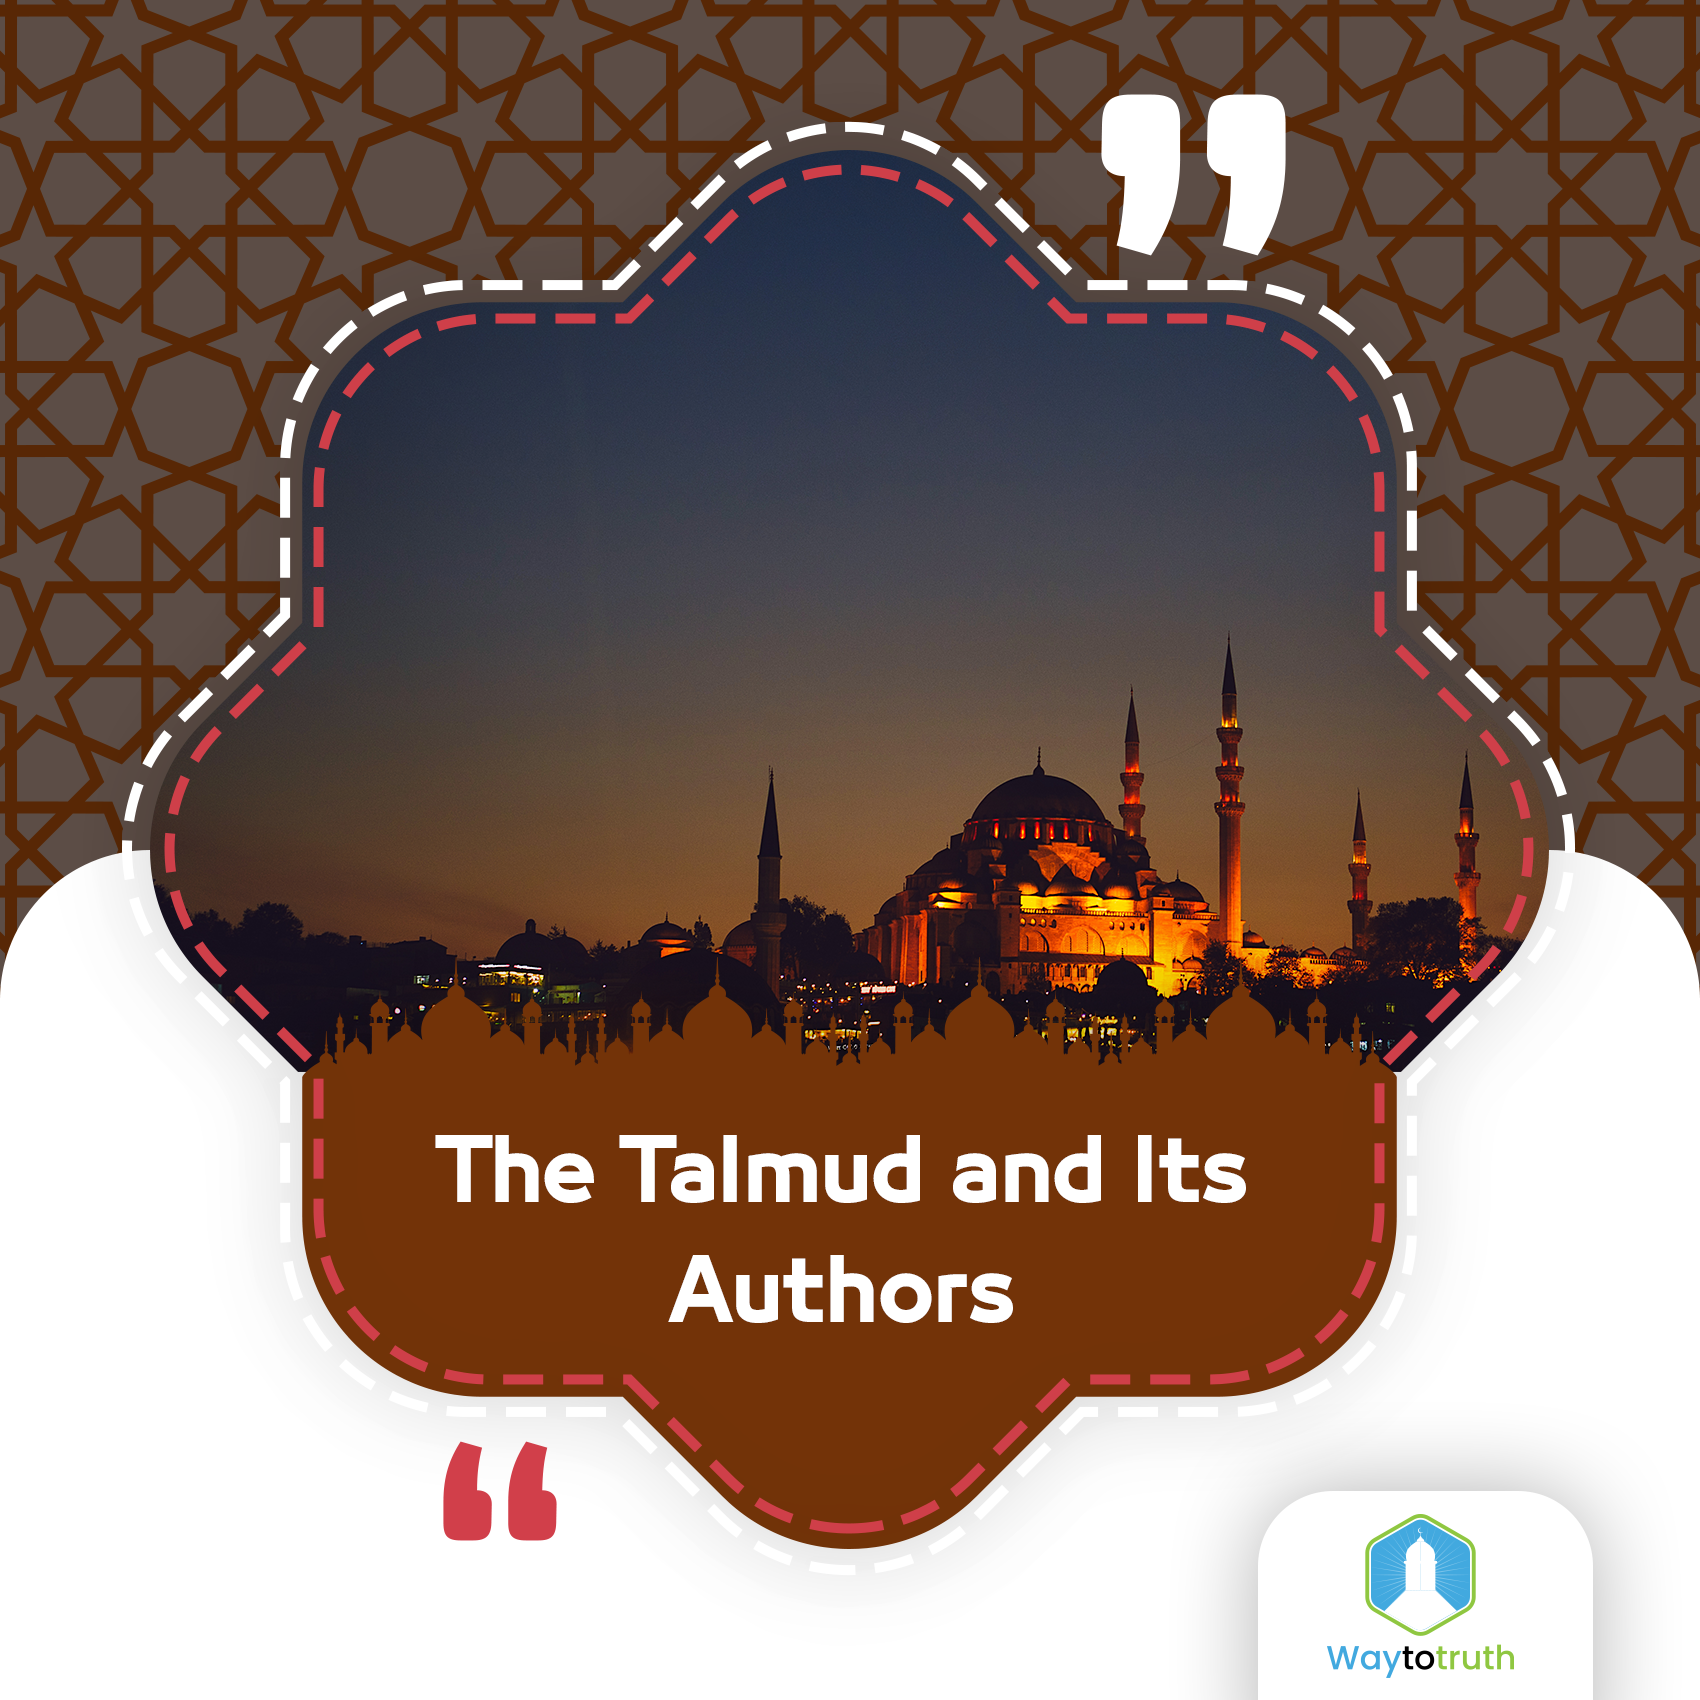 The Talmud and Its Authors